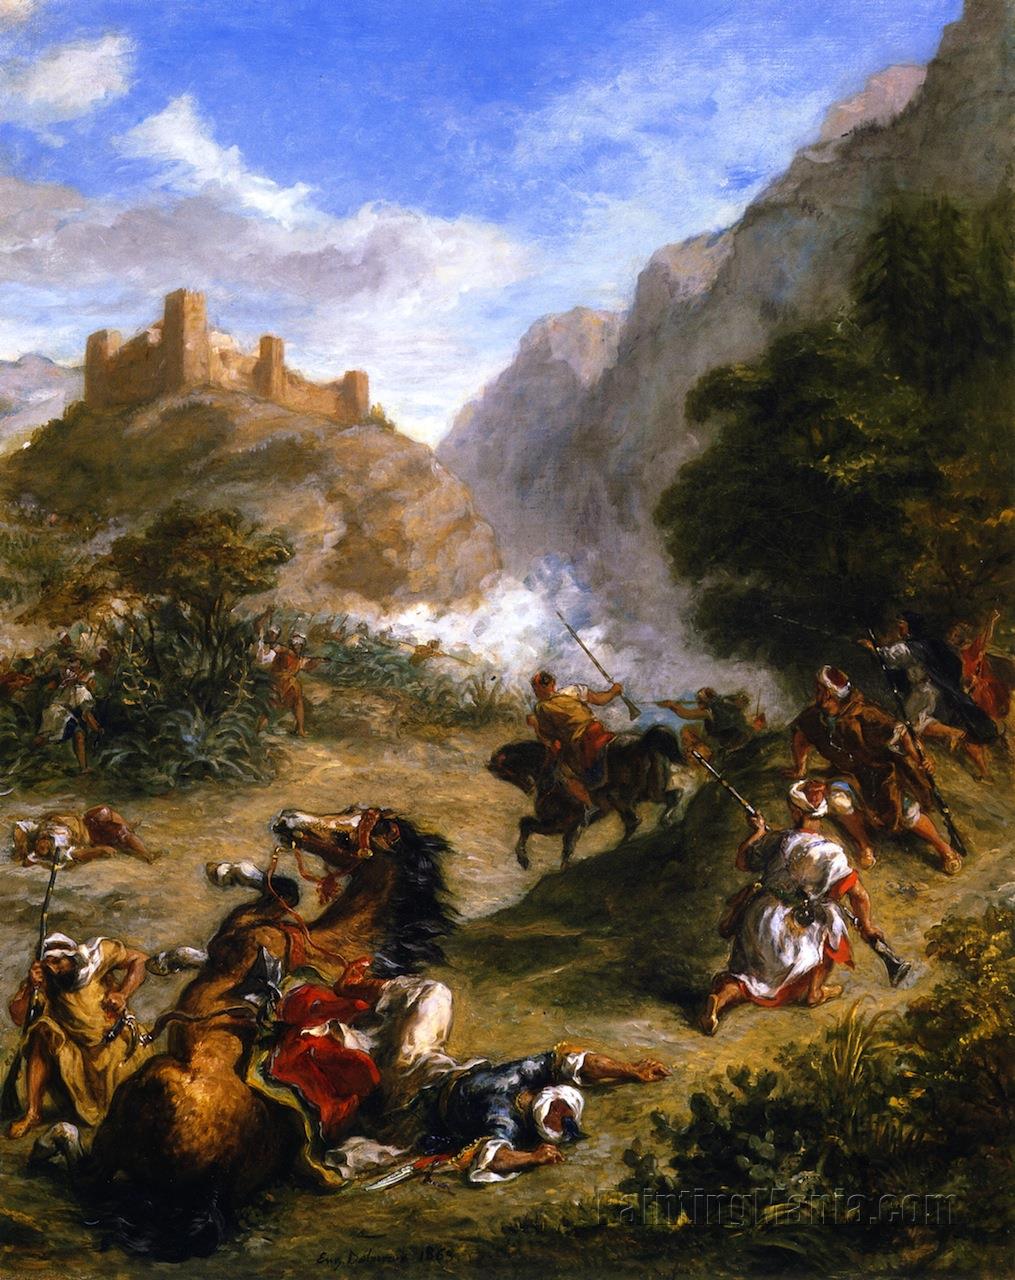 Arabs Skirmishing in the Mountains